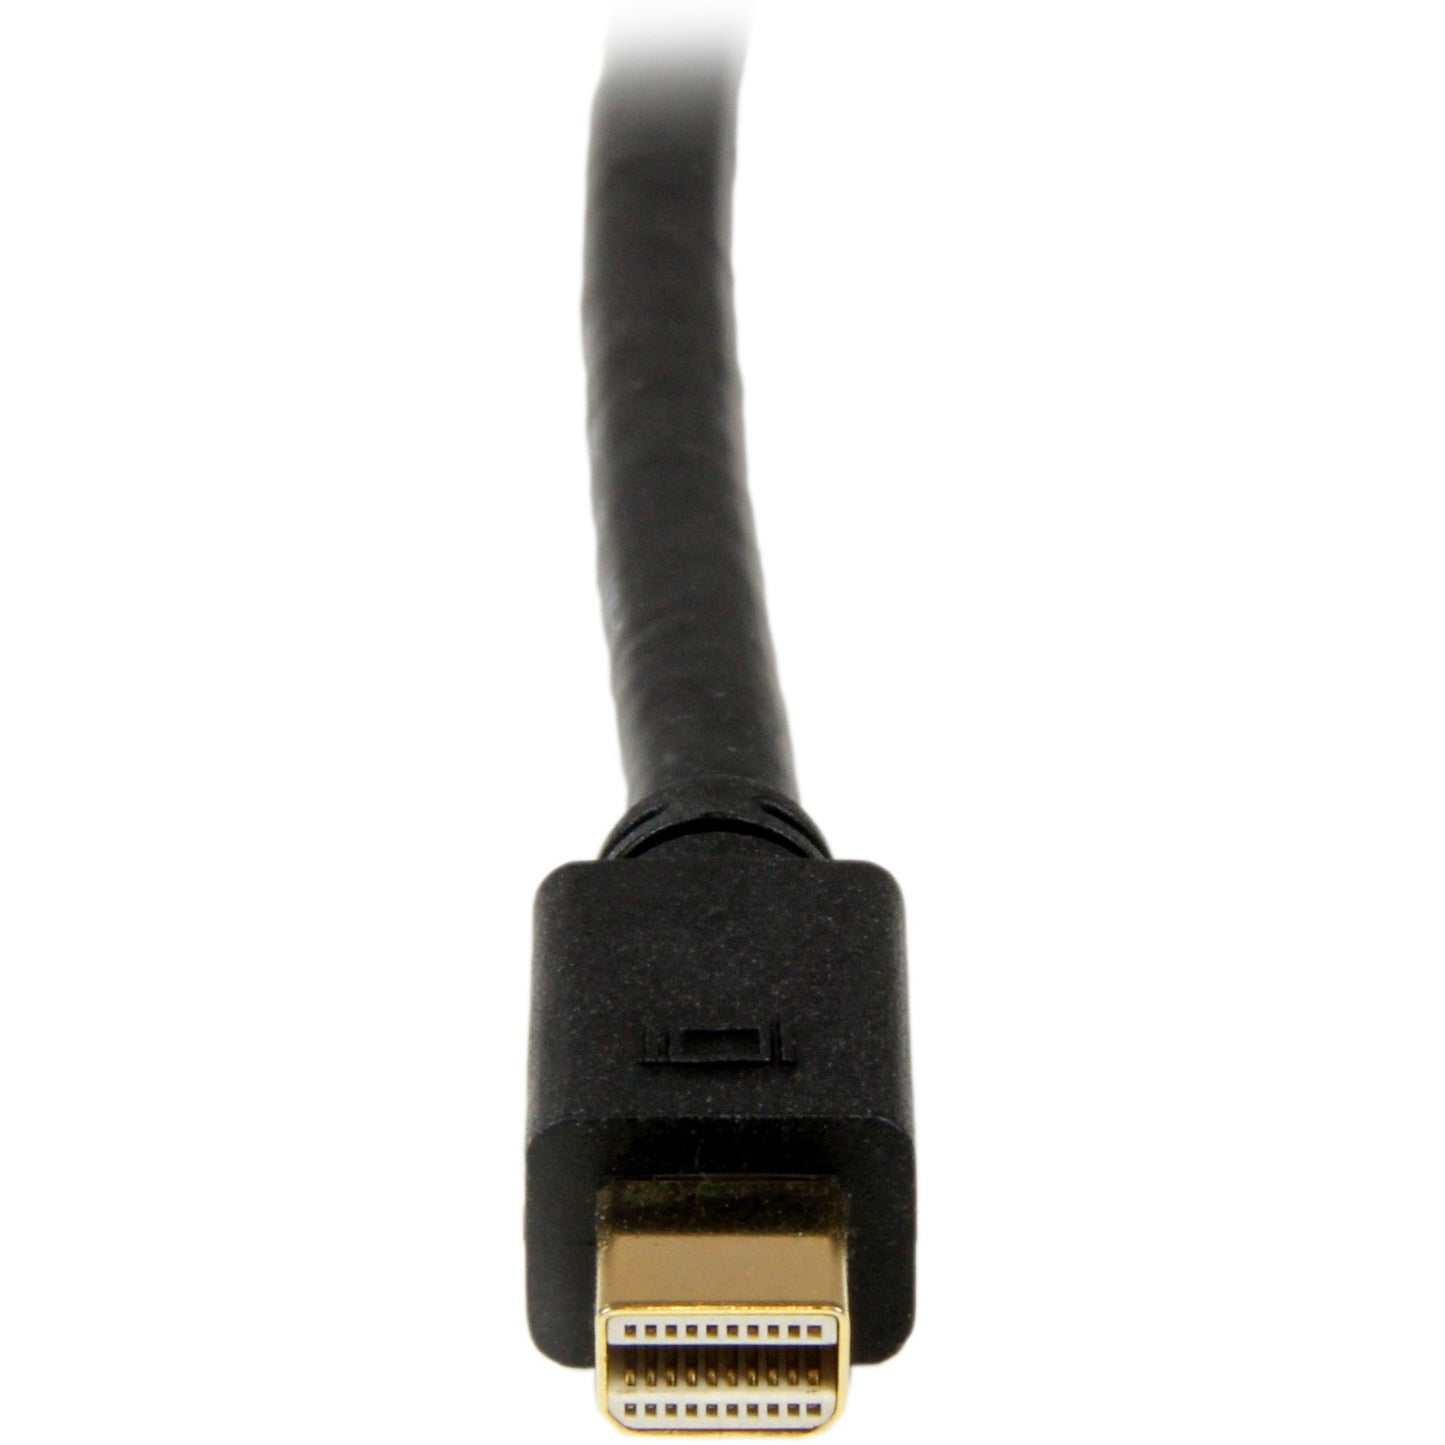 StarTech.com 6ft Mini DisplayPort to DVI Cable Mini DP to DVI-D Adapter/Converter Cable 1080p Video mDP 1.2 to DVI Monitor/Display